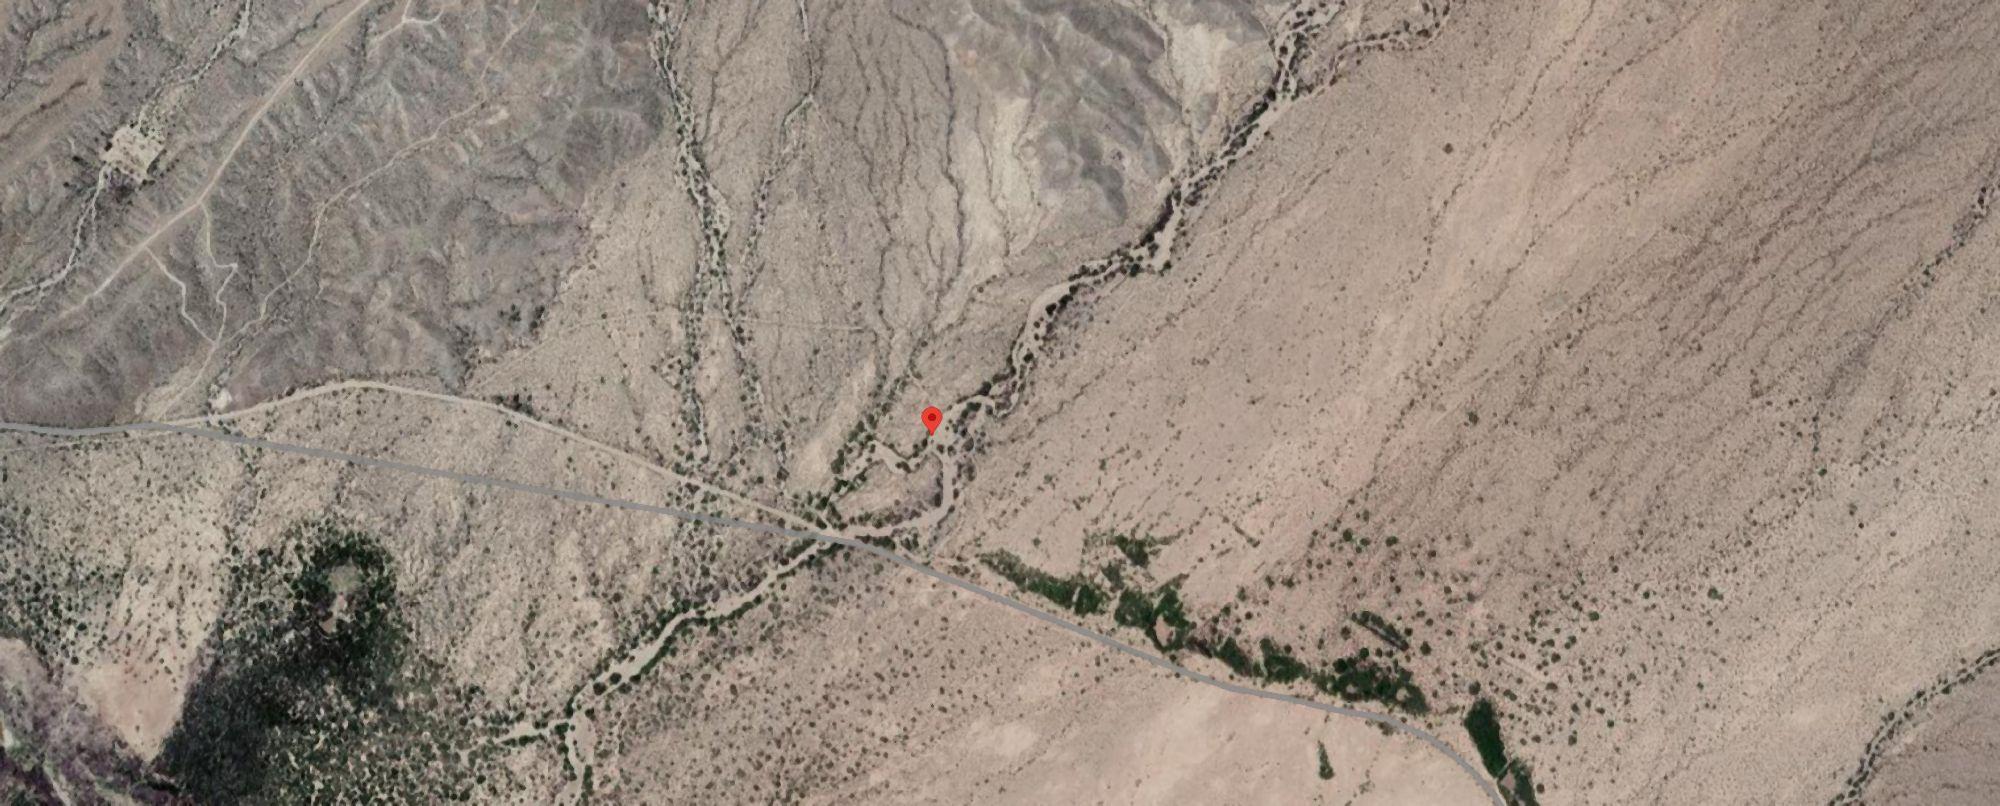 11 Acres in Hudspeth County Texas With Dirt Road Frontage By Rio Grande! Low Monthly Payments!